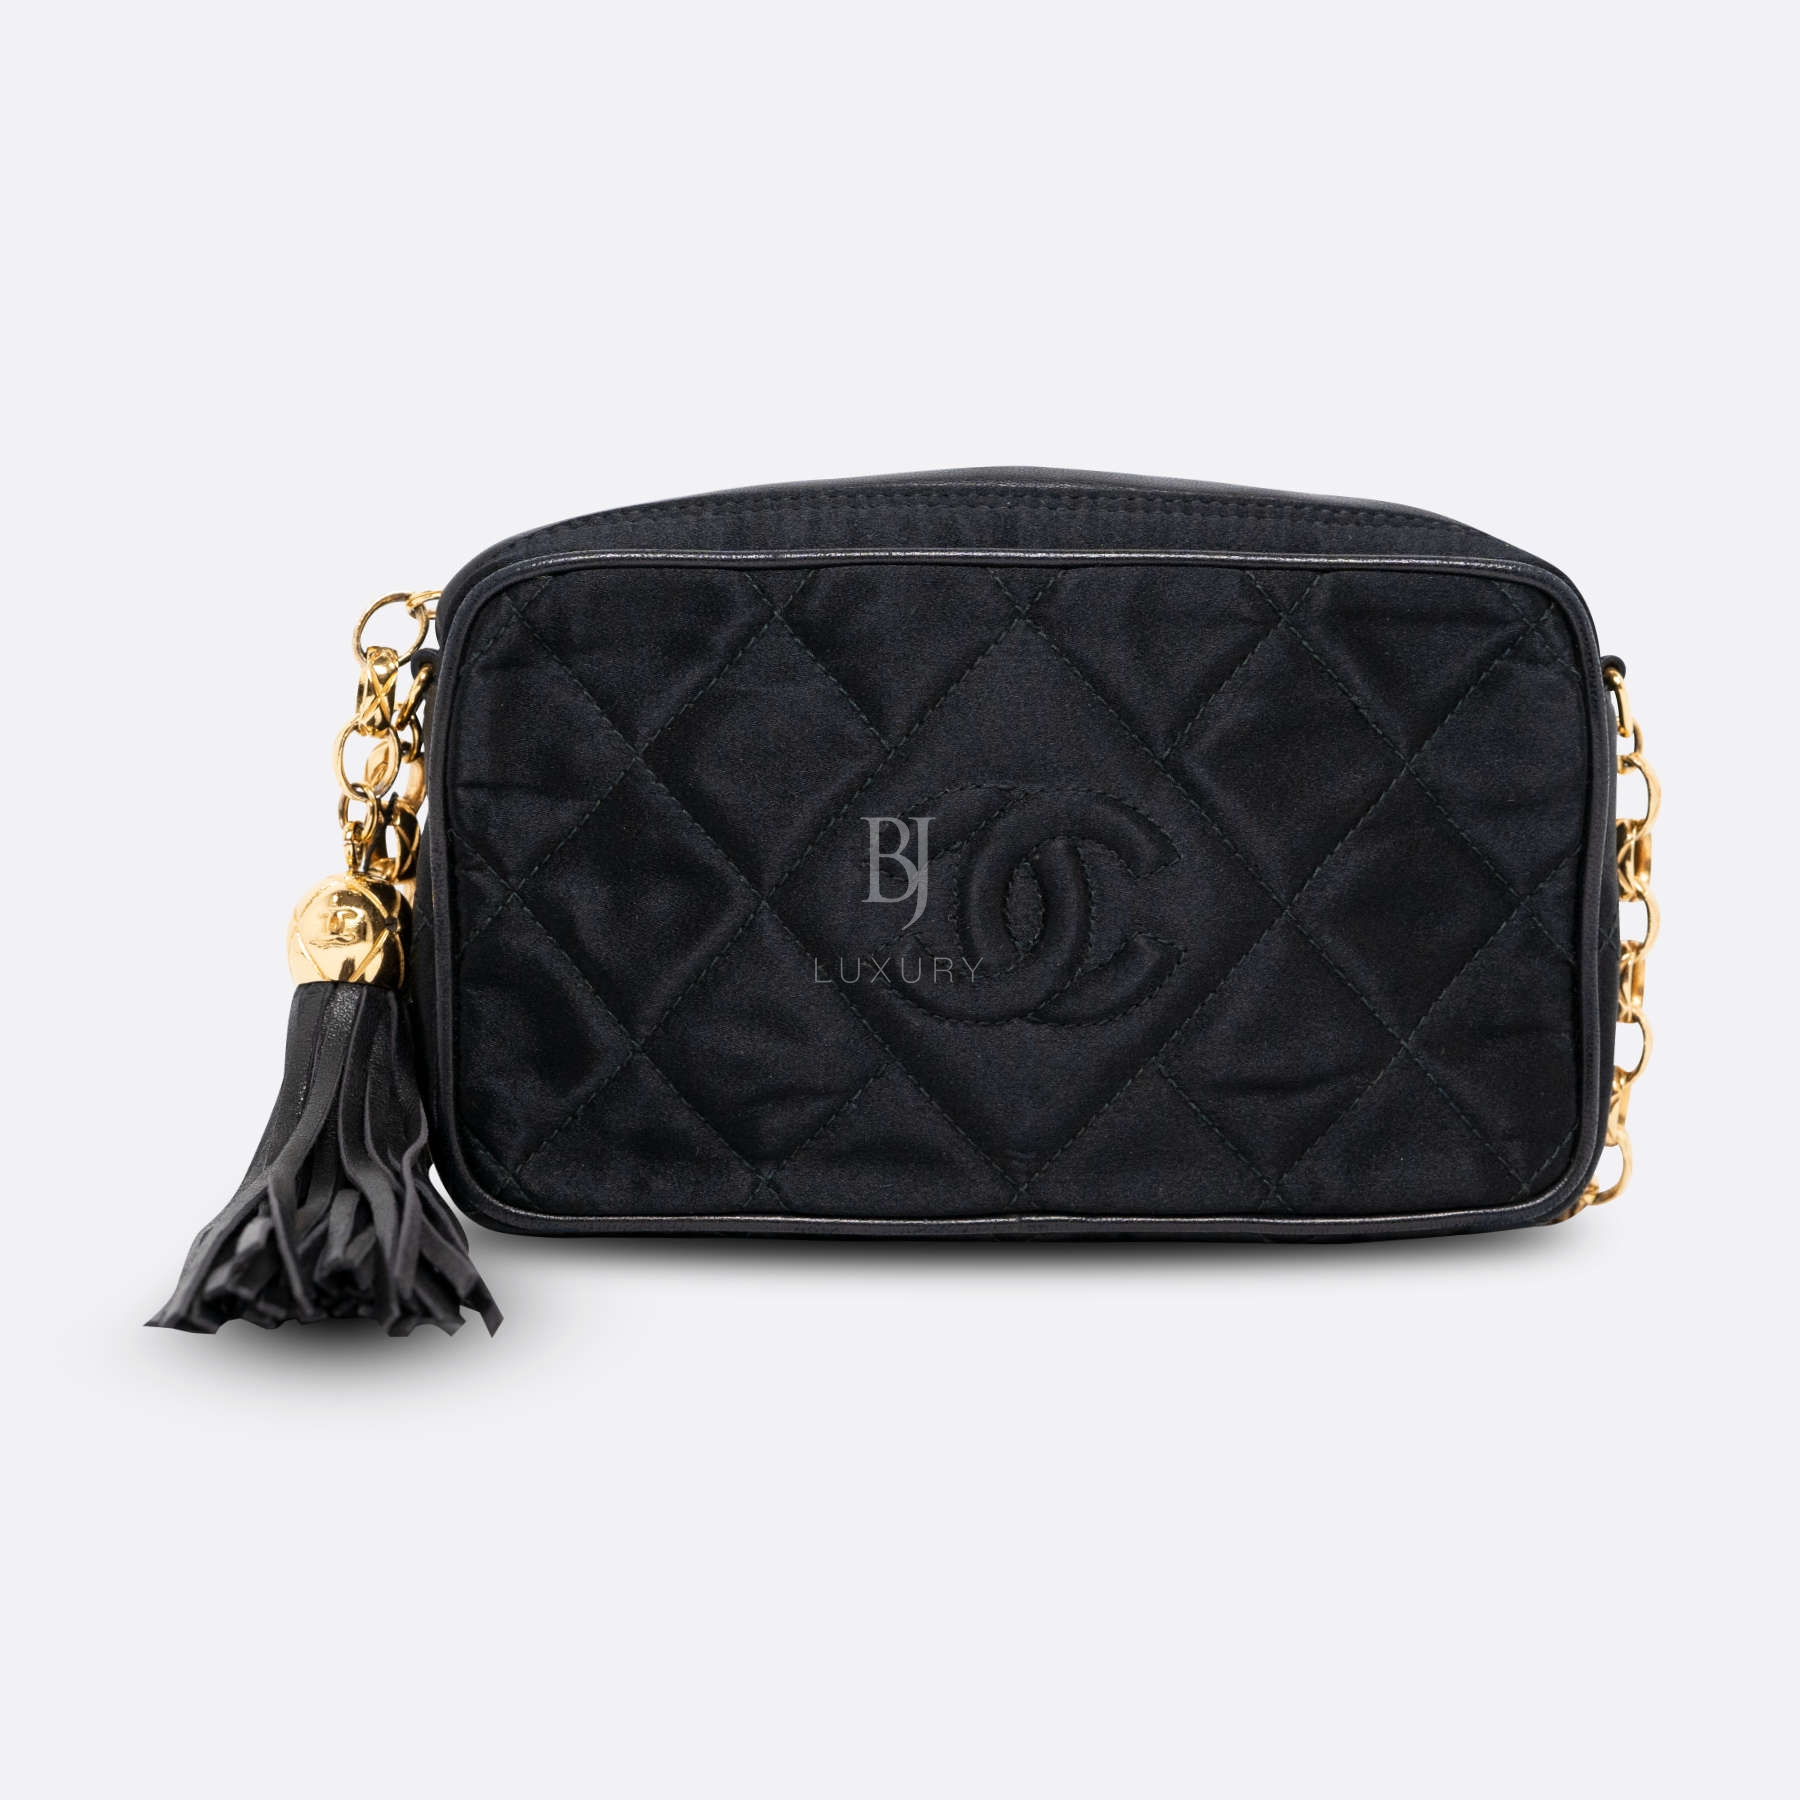 CHANEL-CLUTCHWITHCHAIN-MINI-BLACK-SATIN-4188 front.jpg